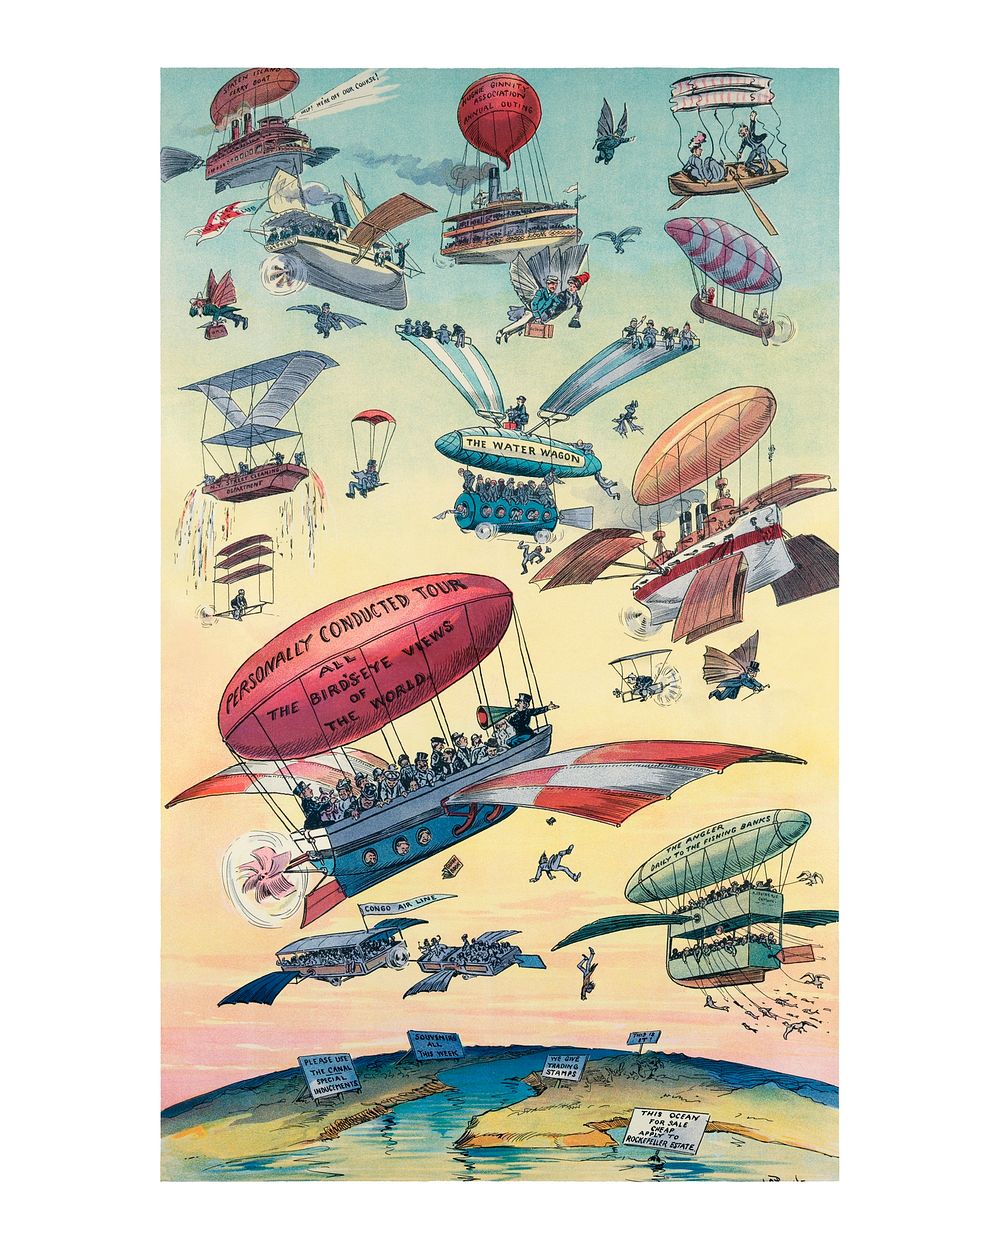 Balloons, flying boats art print, vintage Openings of the Panama Canals poster, remixed from the artwork of John. S Pughe